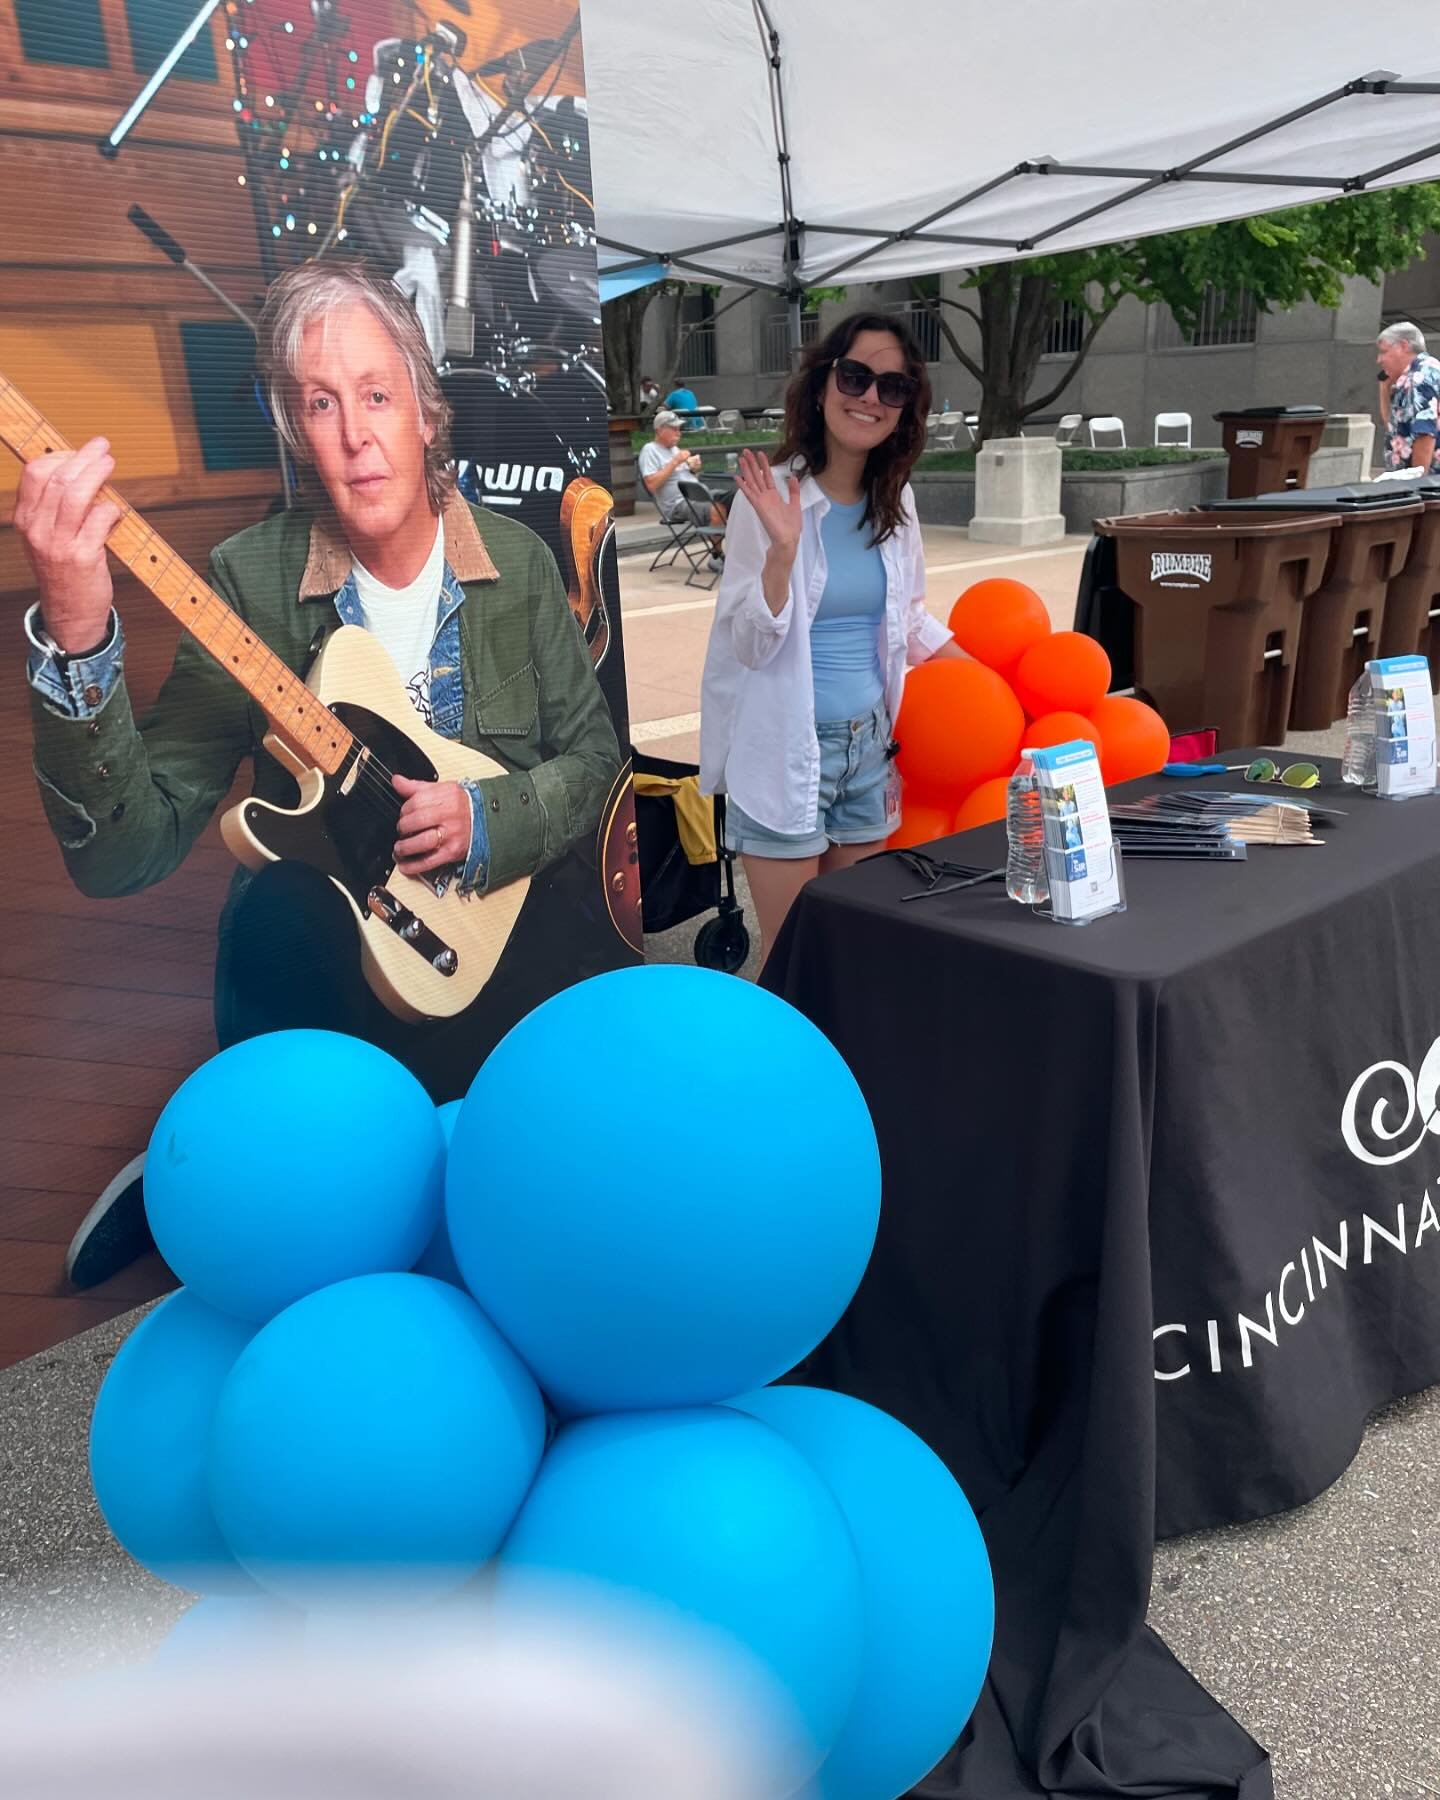 Doing our part to #GetPaulToMusicHall - stop by Taste of Cincinnati and say hi! 

#meetopera